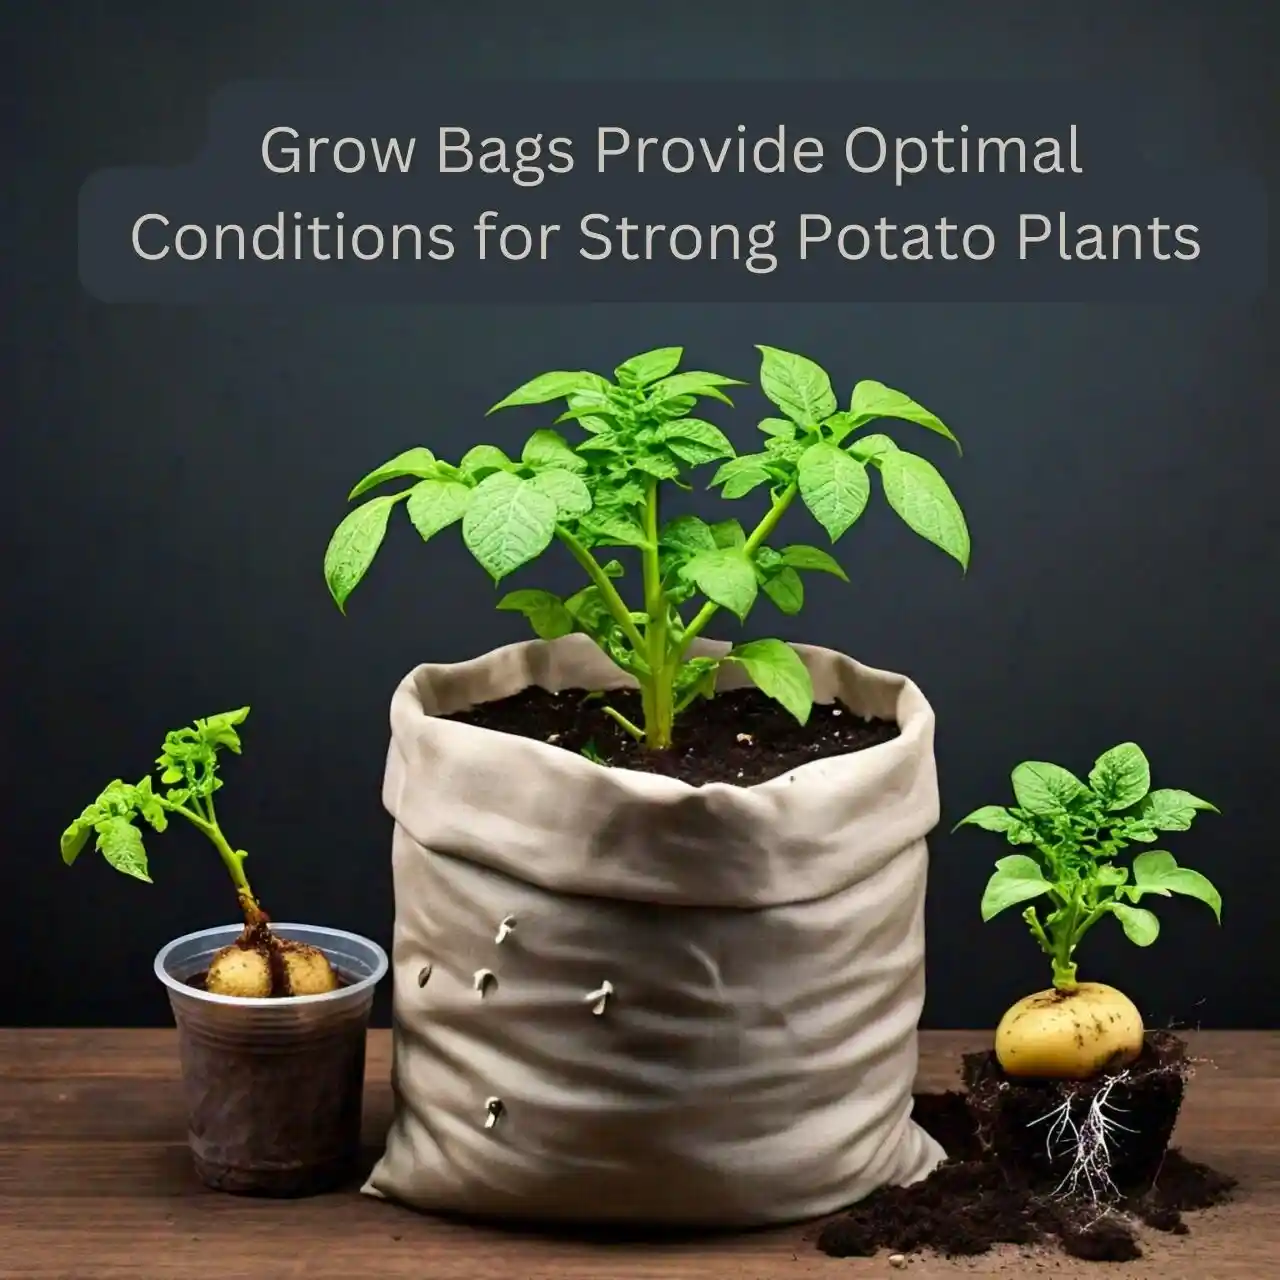 Grow Bags Provide Optimal Conditions for Strong Potato Plants